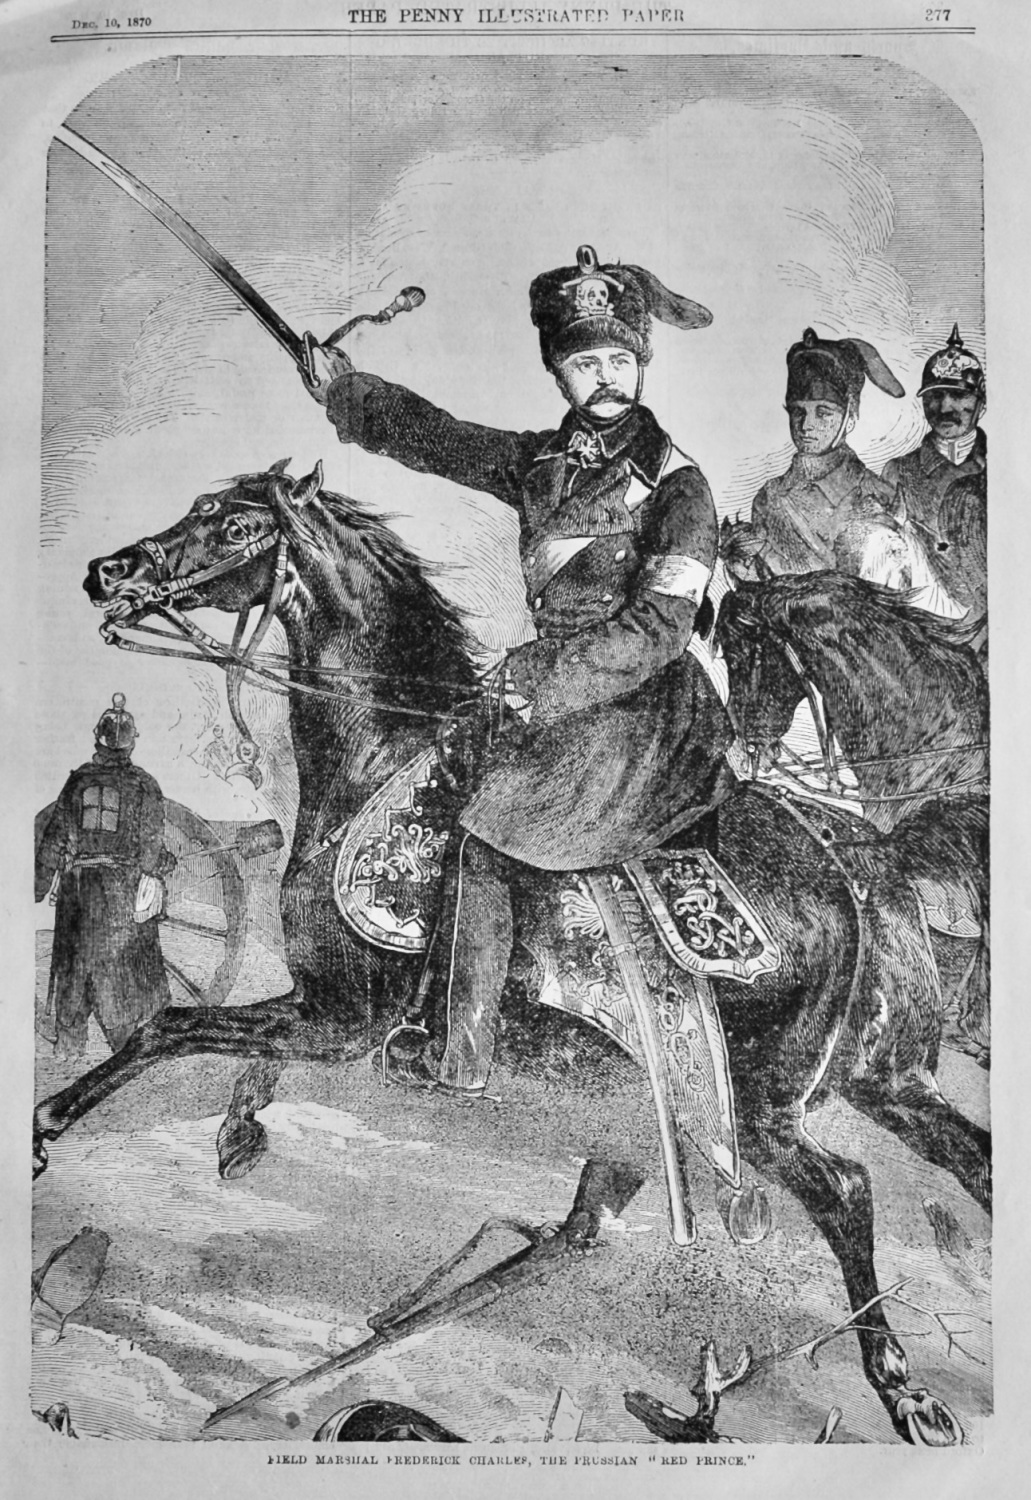 Field Marshal Frederick Charles, The Prussian 